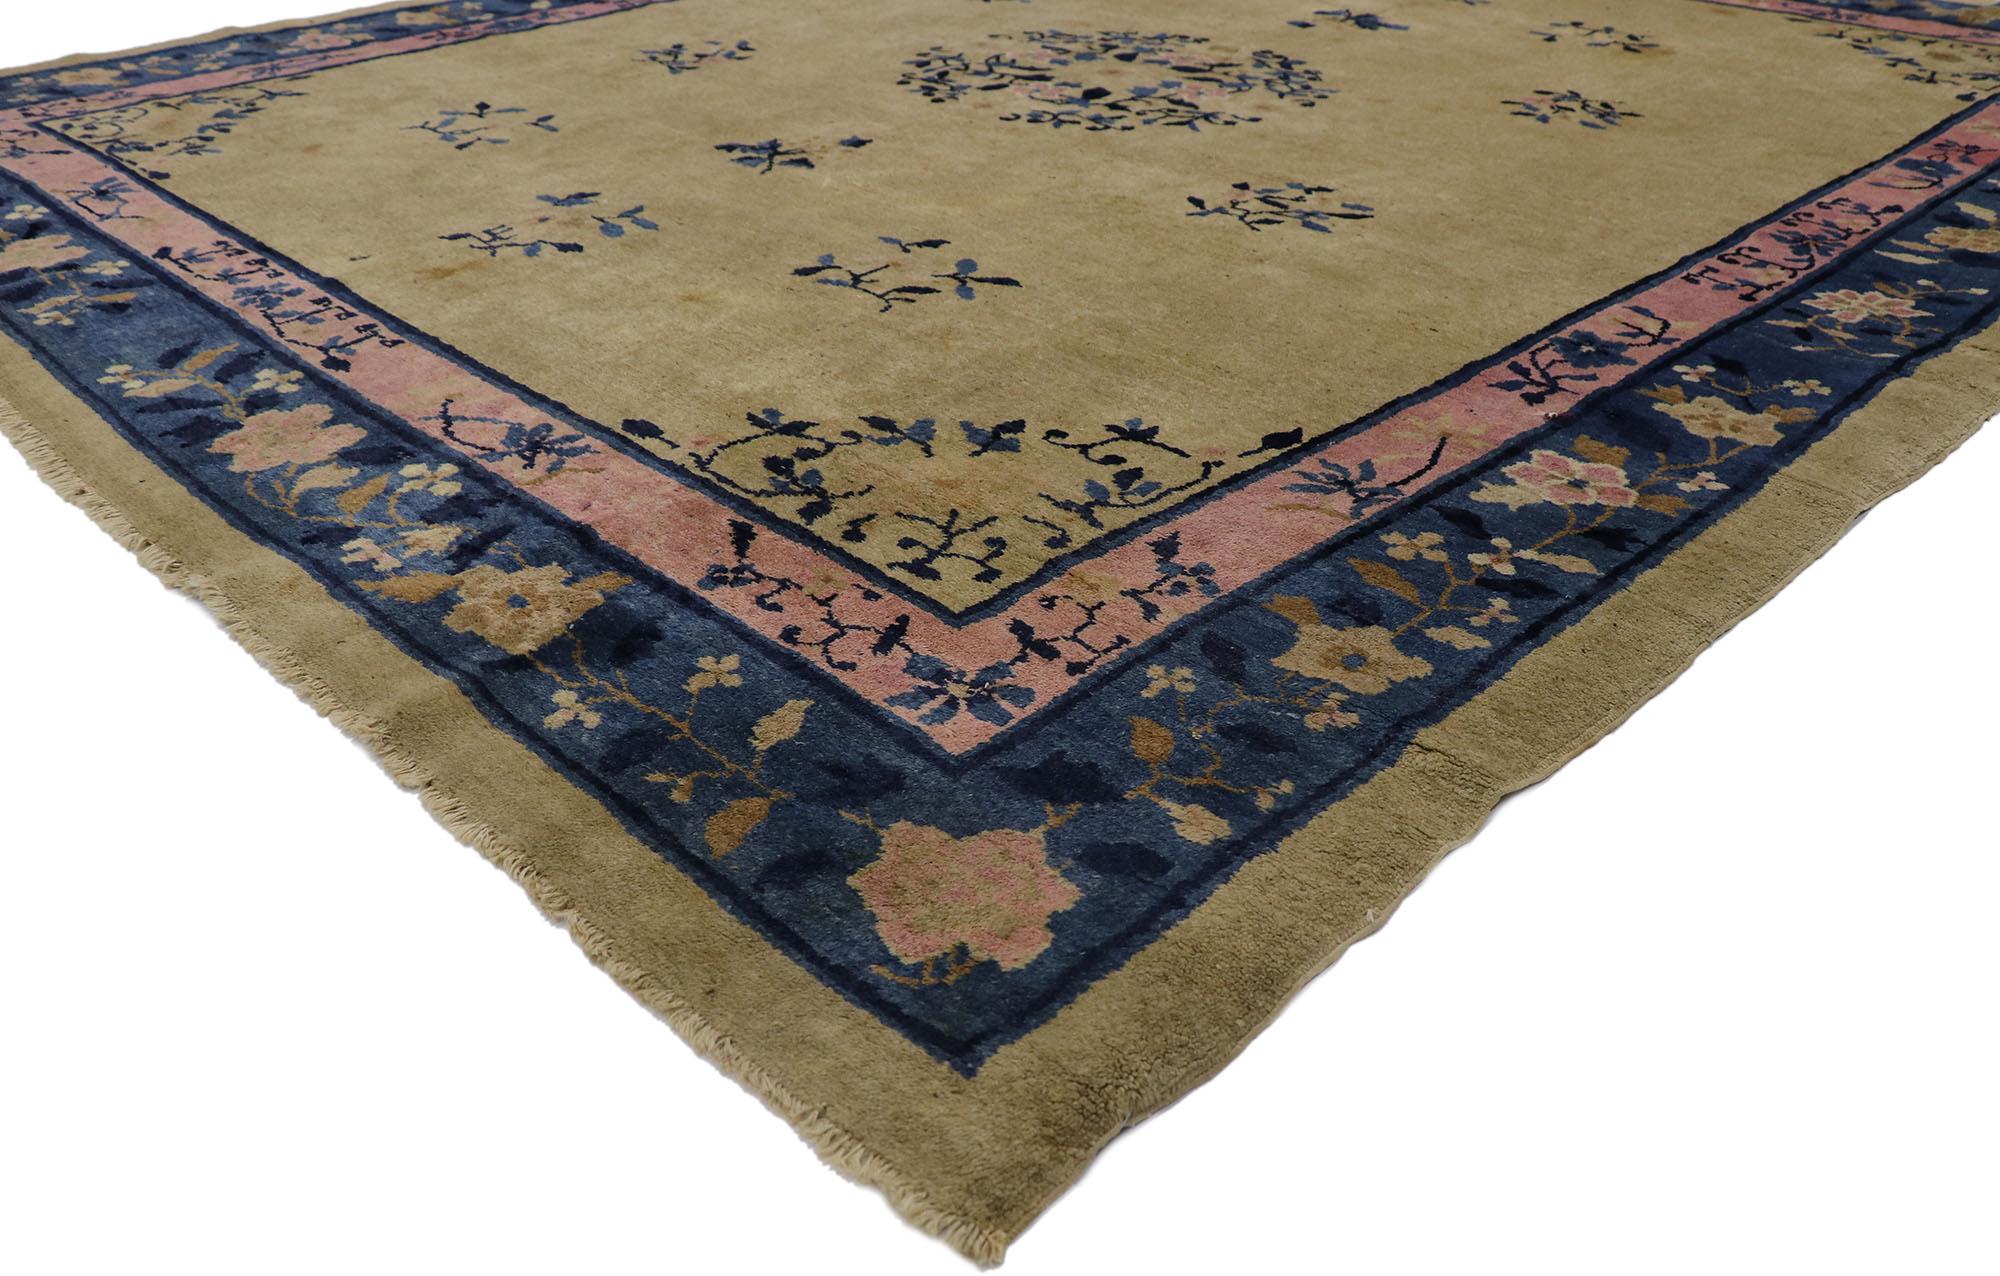 78130 Antique Chinese Peking Rug with Traditional Chinoiserie Style 08'03 x 09'08. This hand-knotted wool antique Chinese Peking rug features a rounded open medallion decorated with a large open lotus blossom, peonies, and leafy tendrils floating in